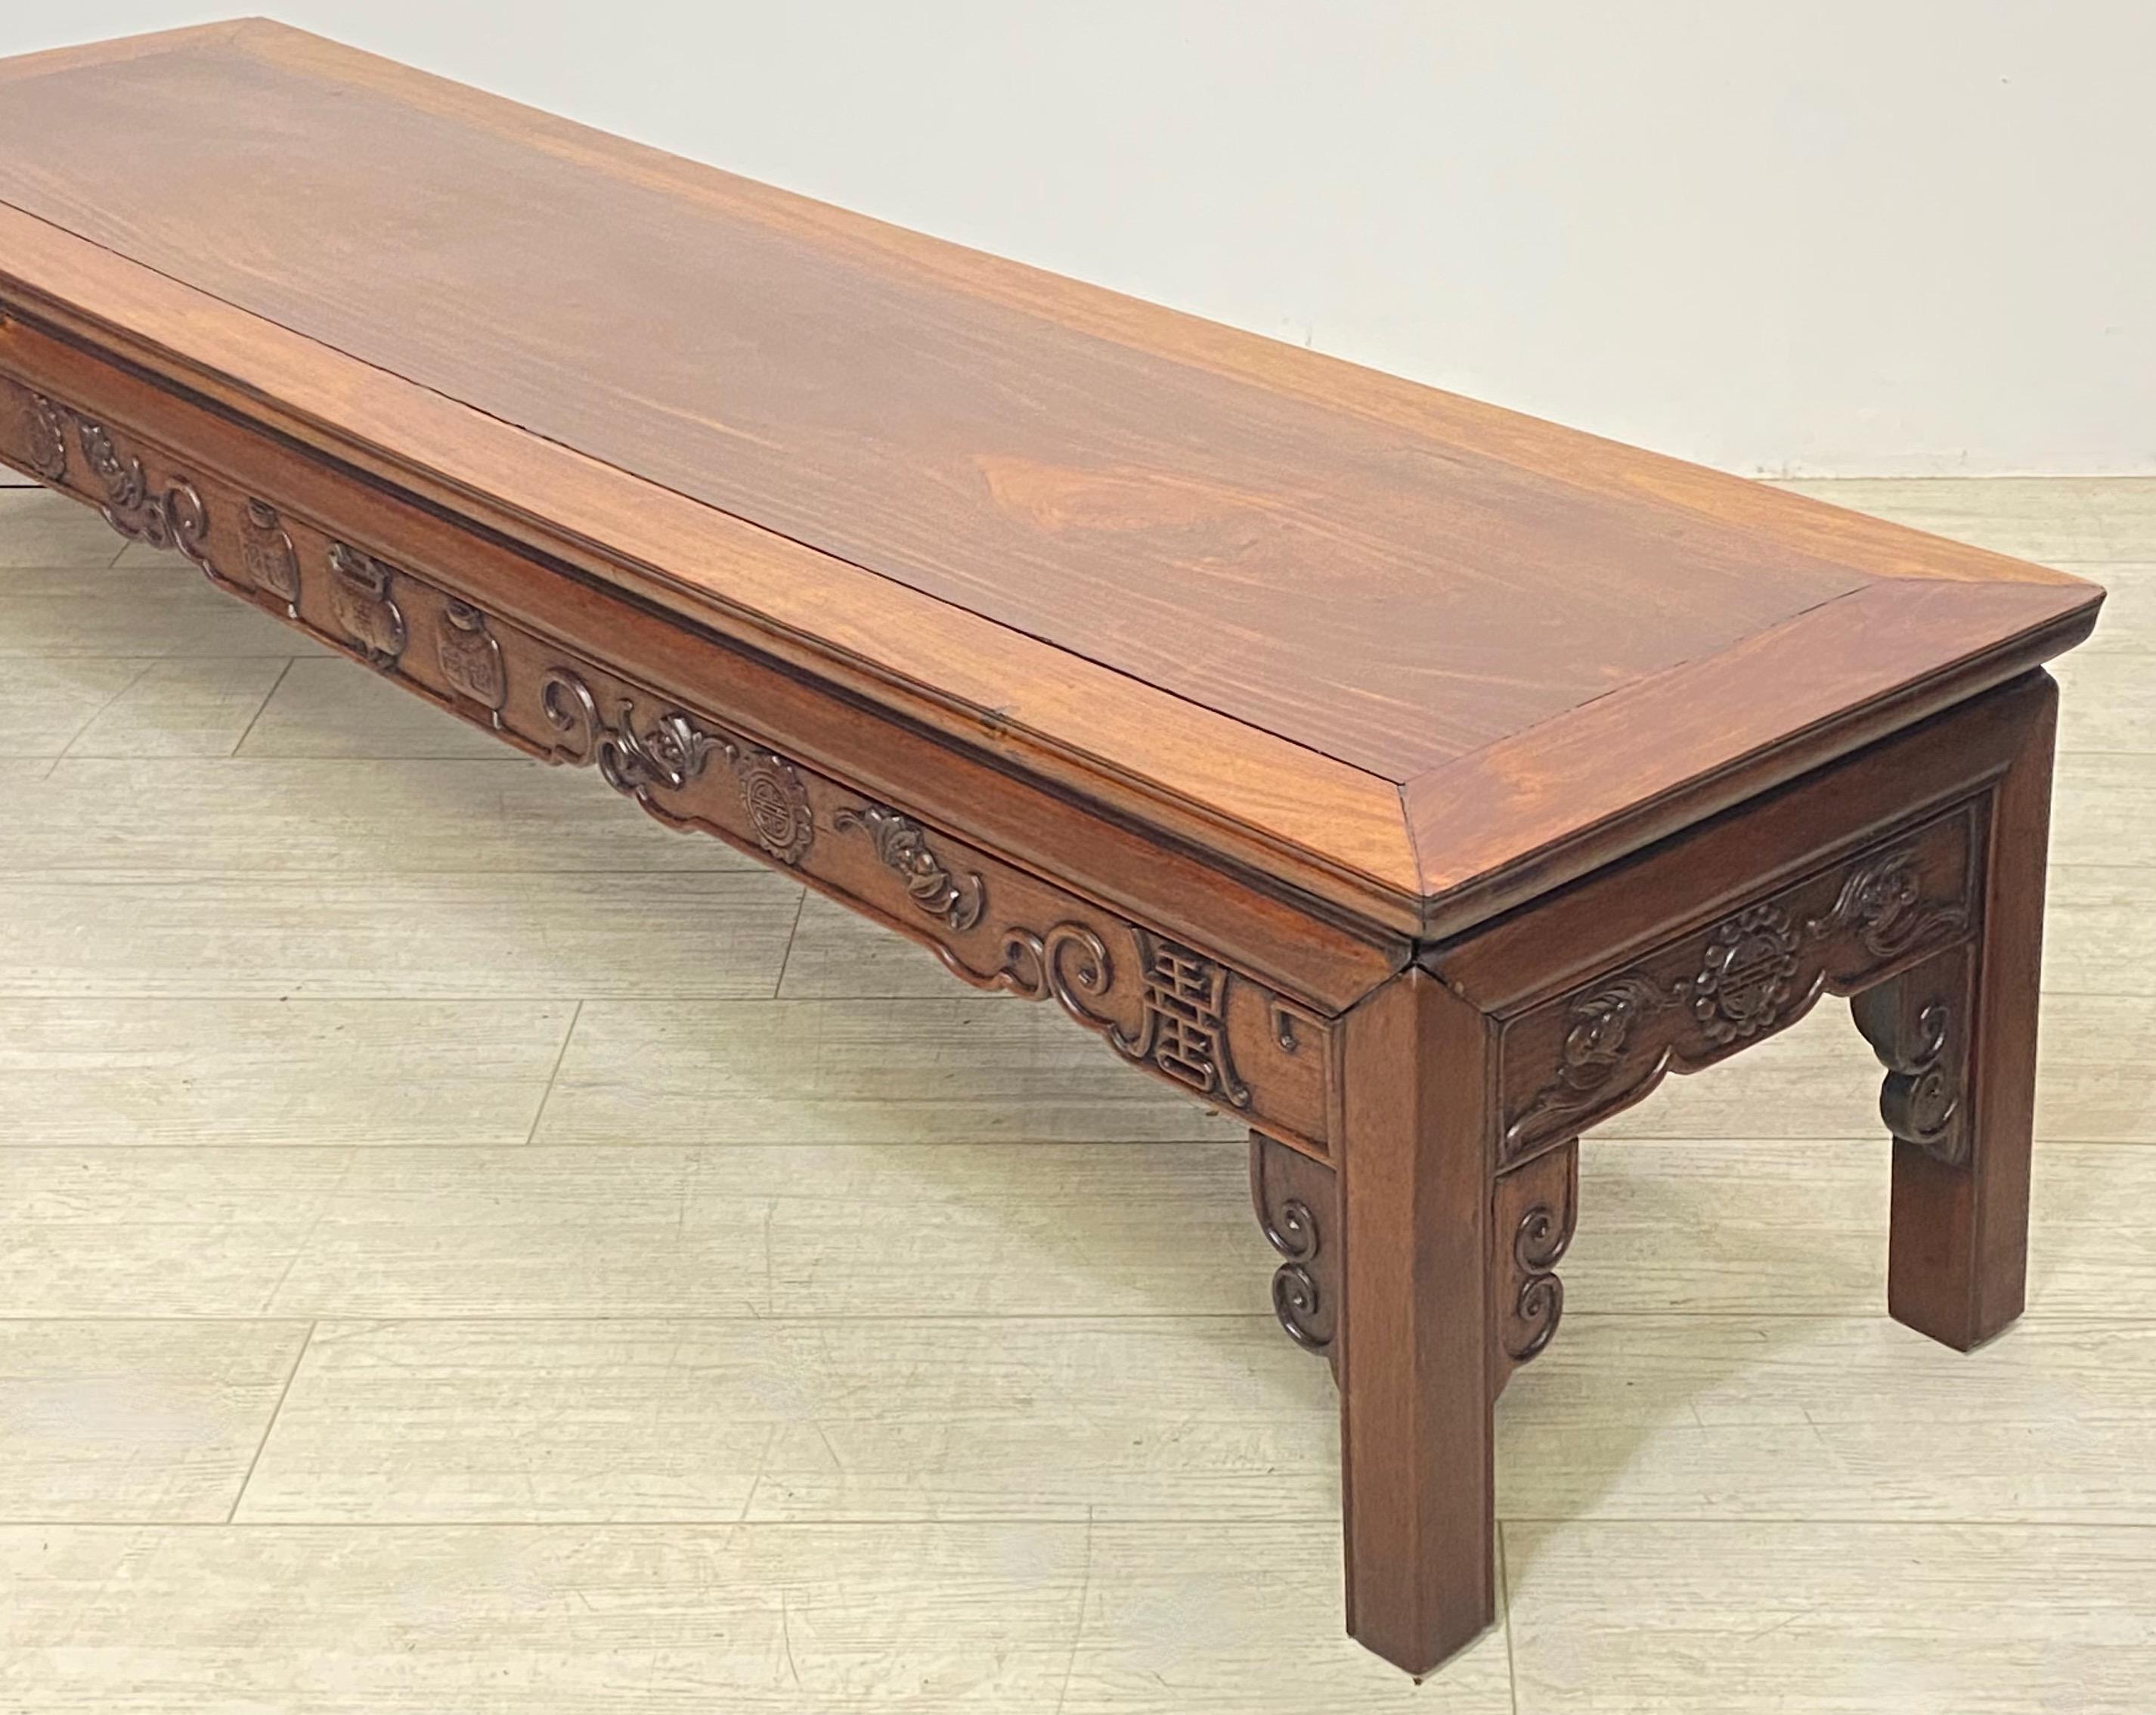 Chinese Rosewood Long Low Table or Bench, Late 19th to Early 20th Century 6